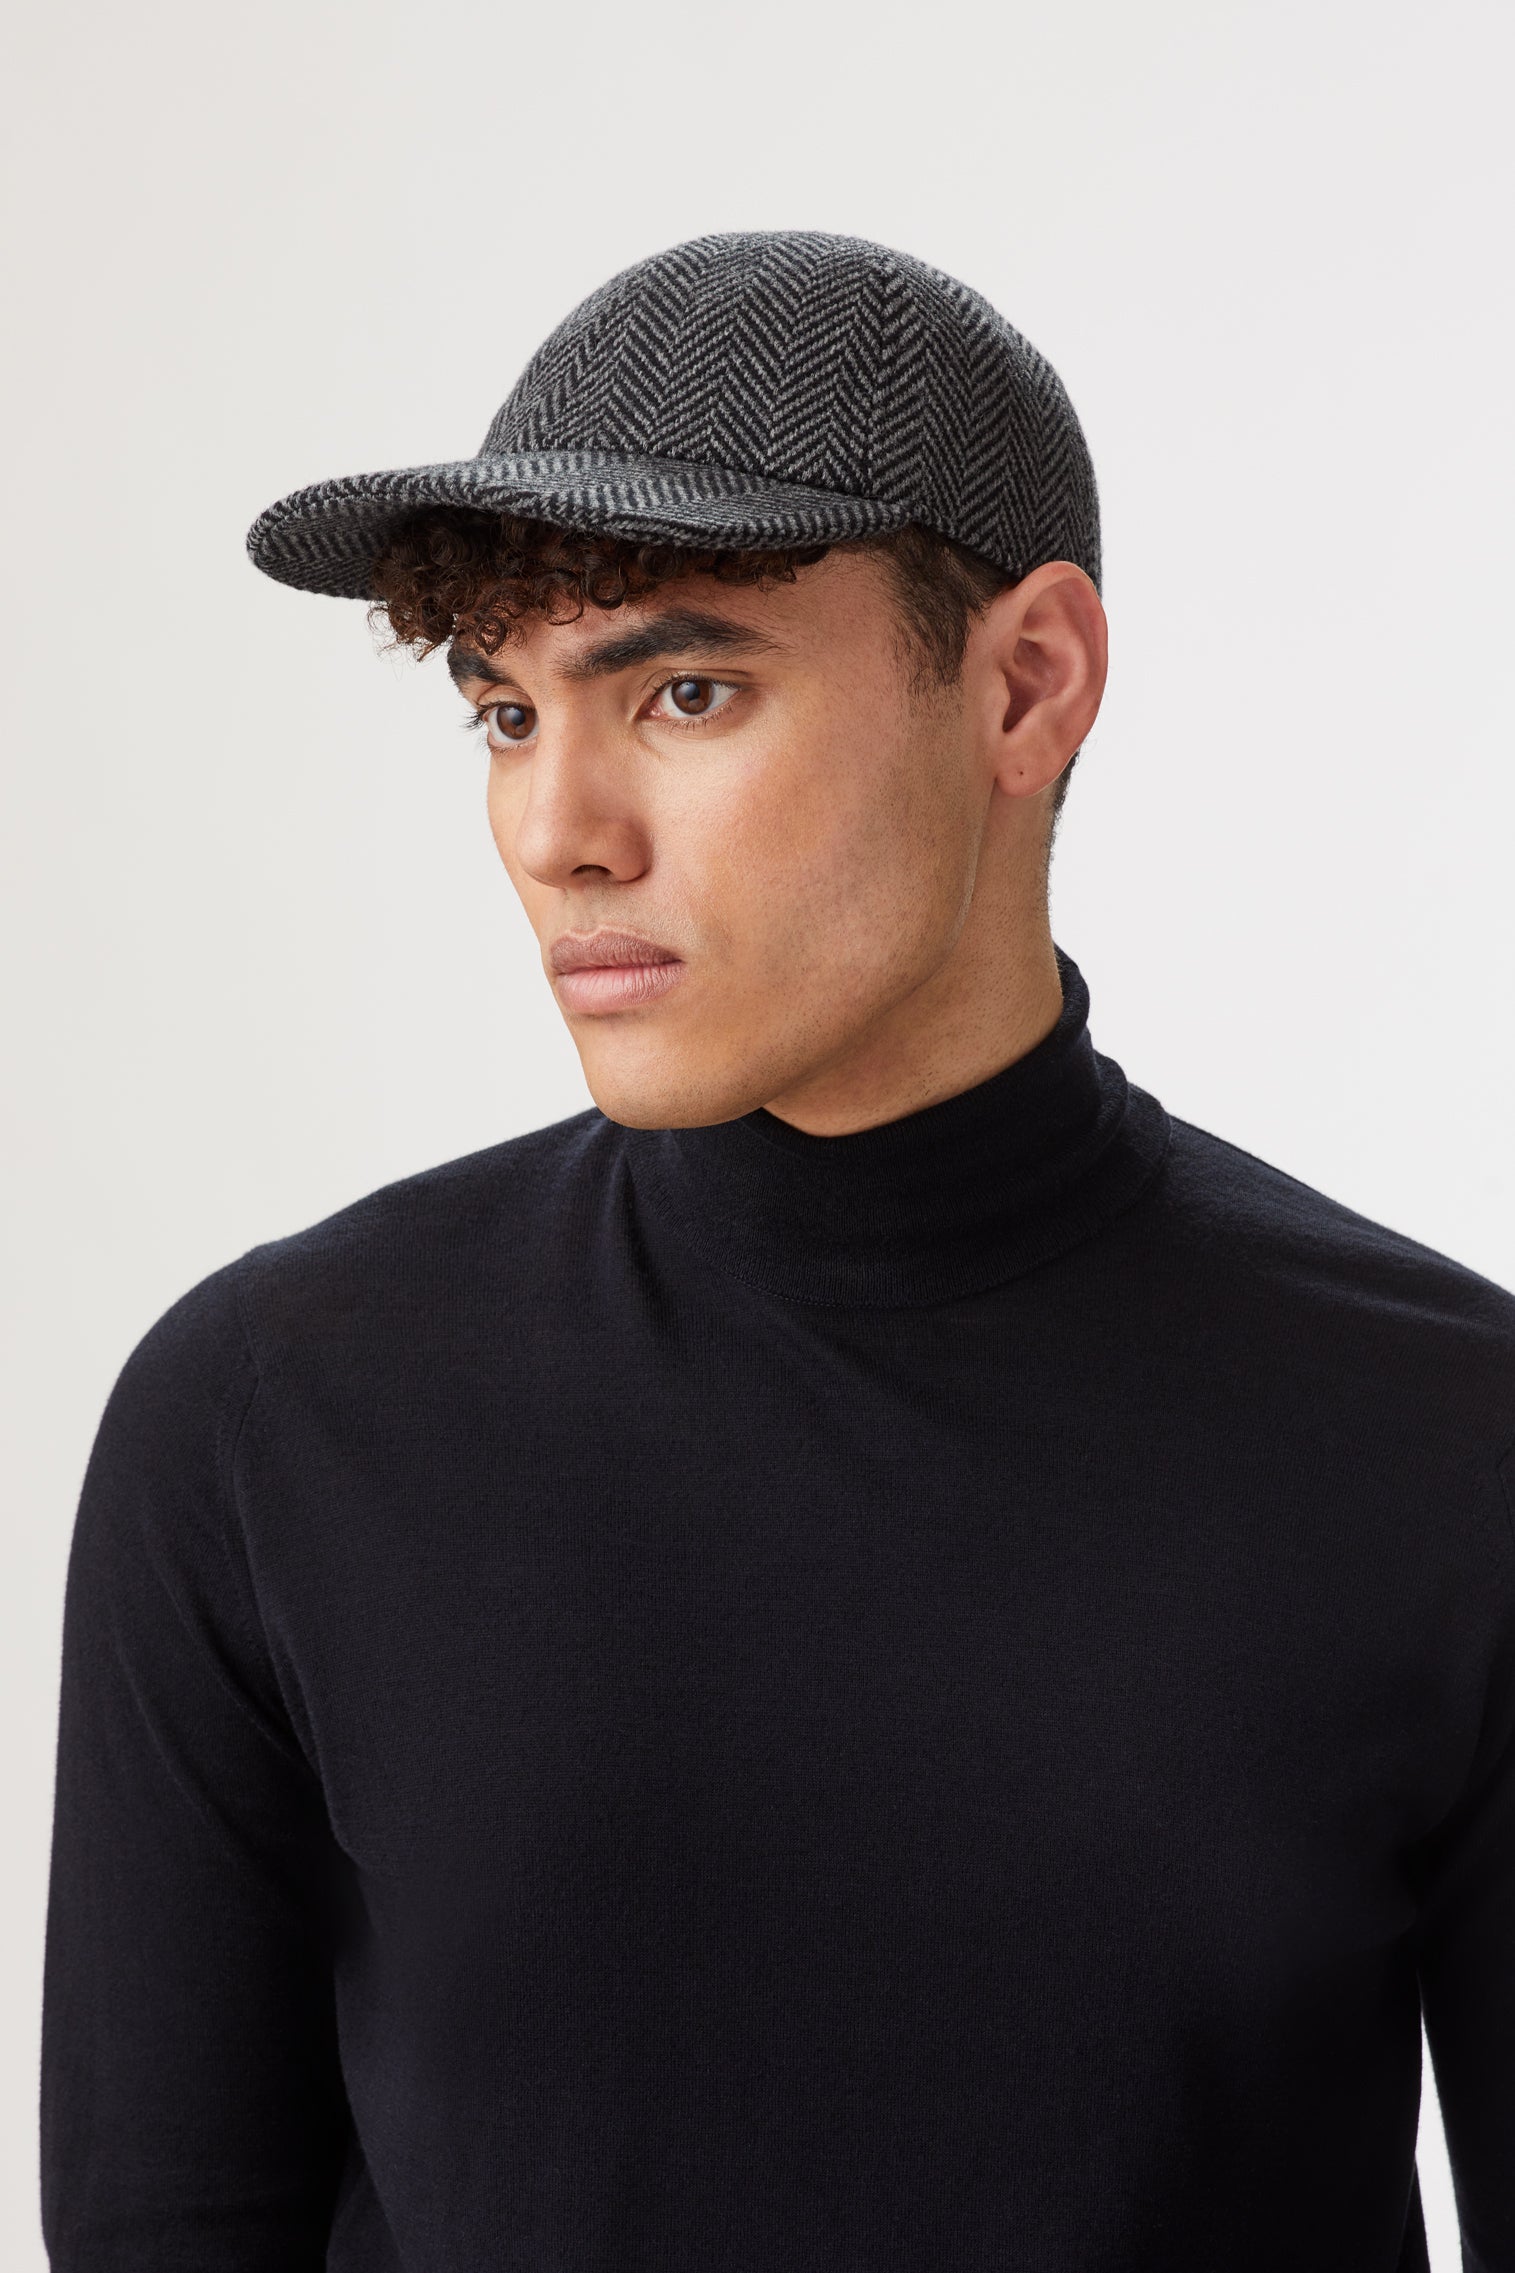 Escorial Wool Baseball Cap - Hats for Square Face Shapes - Lock & Co. Hatters London UK